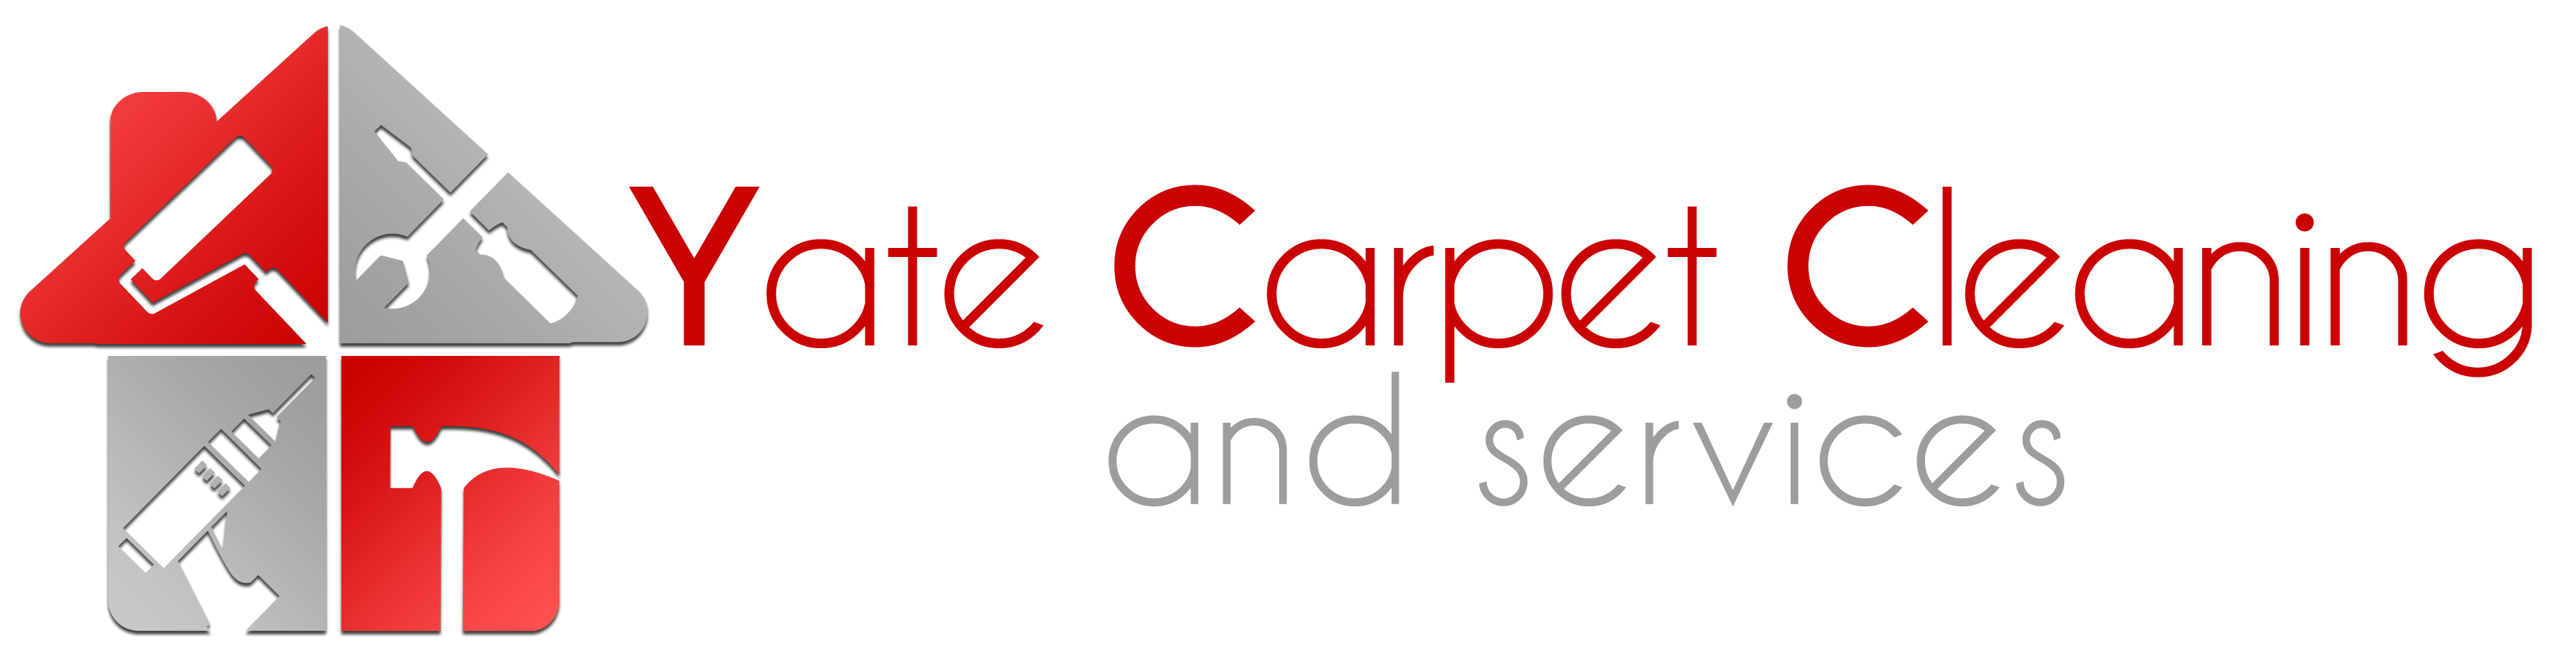 Yate Carpet Cleaning & Services